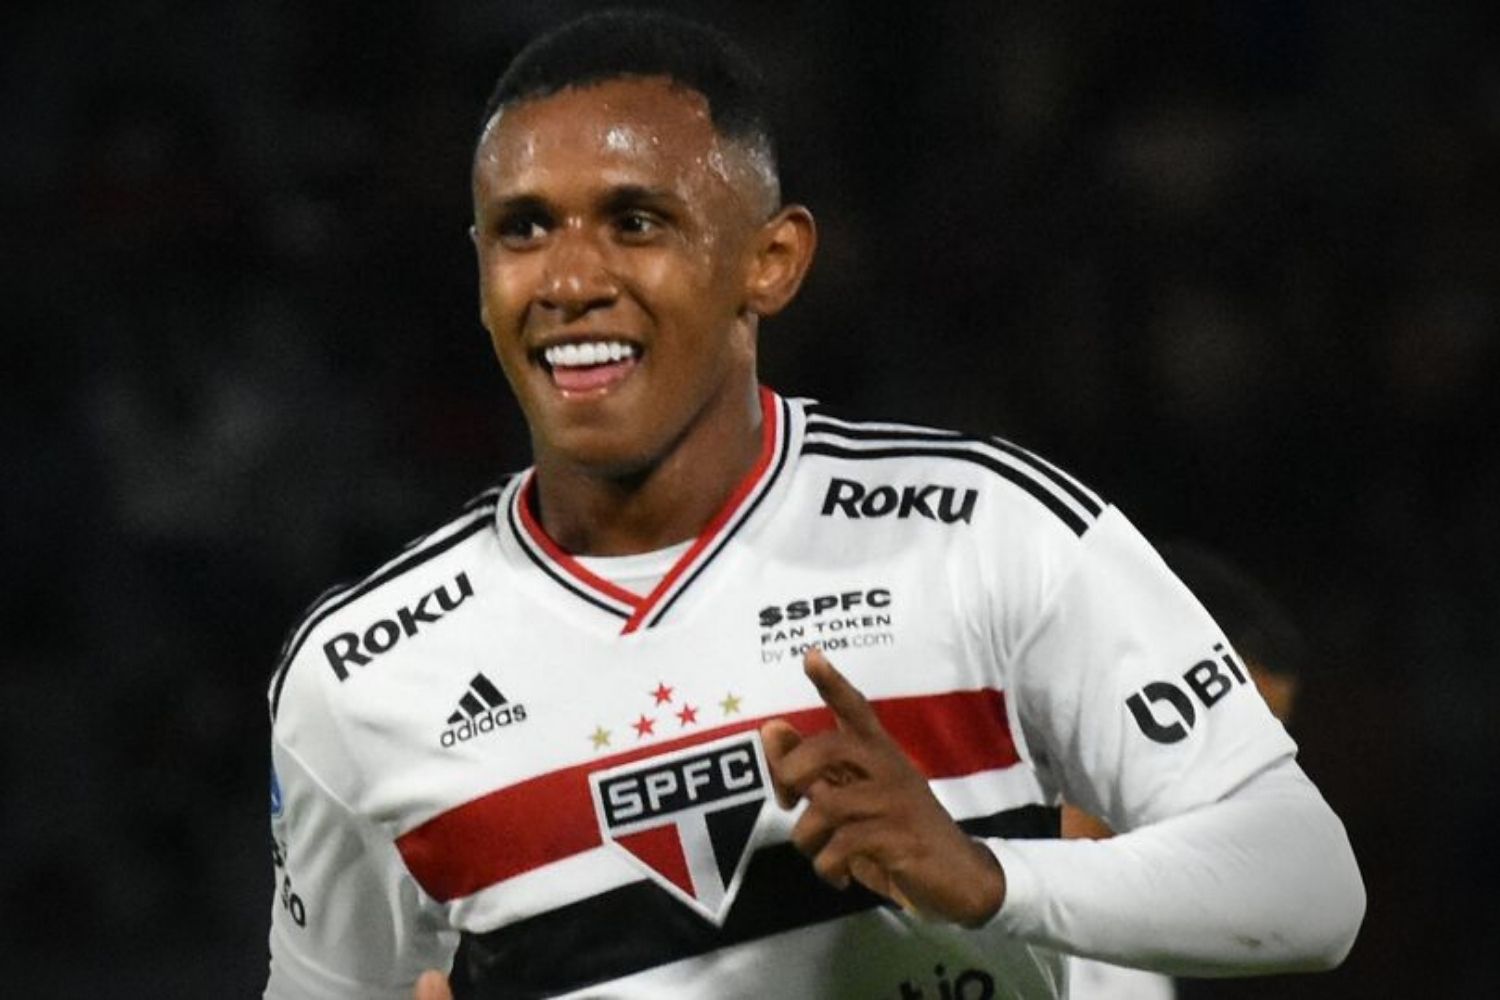 Arsenal to sign 19 years old Marquinhos from Sao Paulo